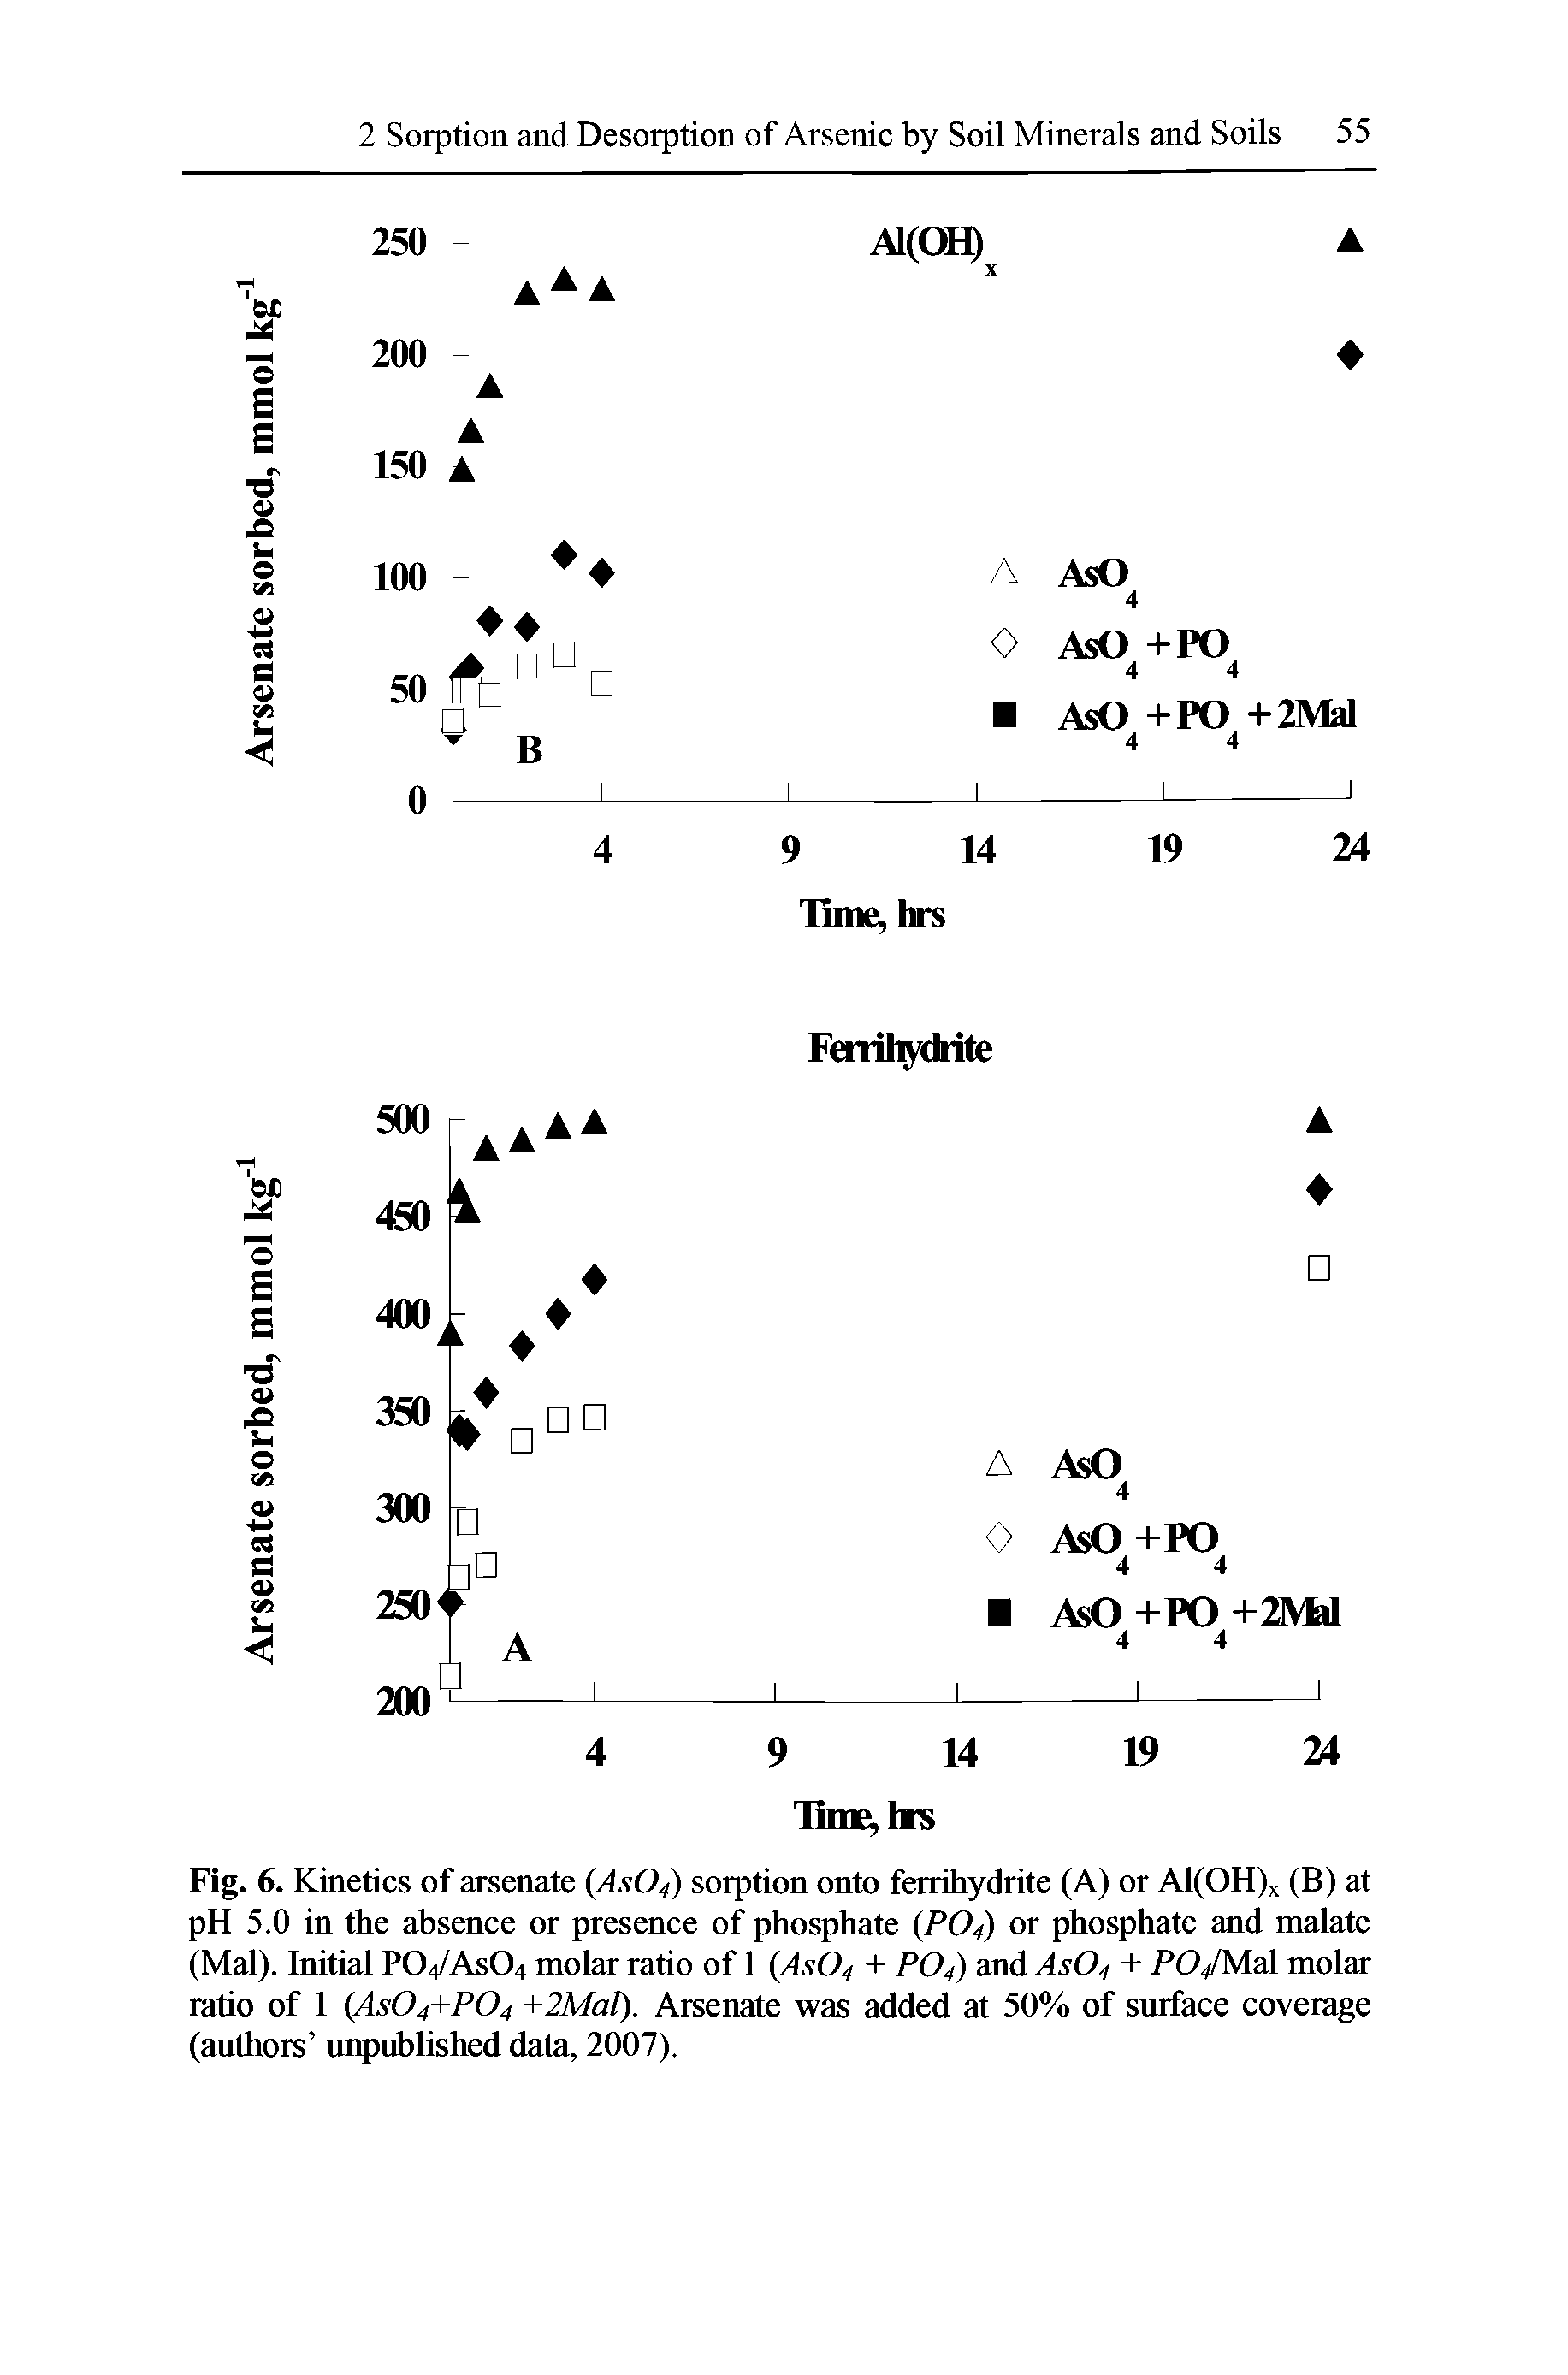 Fig. 6. Kinetics of arsenate (As04) sorption onto ferrihydrite (A) or Al(OH)x (B) at pH 5.0 in the absence or presence of phosphate (P04) or phosphate and malate (Mai). Initial PO4/ASO4 molar ratio of 1 (As04 + P04) and AsO4 + PO/Mal molar ratio of 1 (As04+P04 +2Mal). Arsenate was added at 50% of surface coverage (authors unpublished data, 2007).